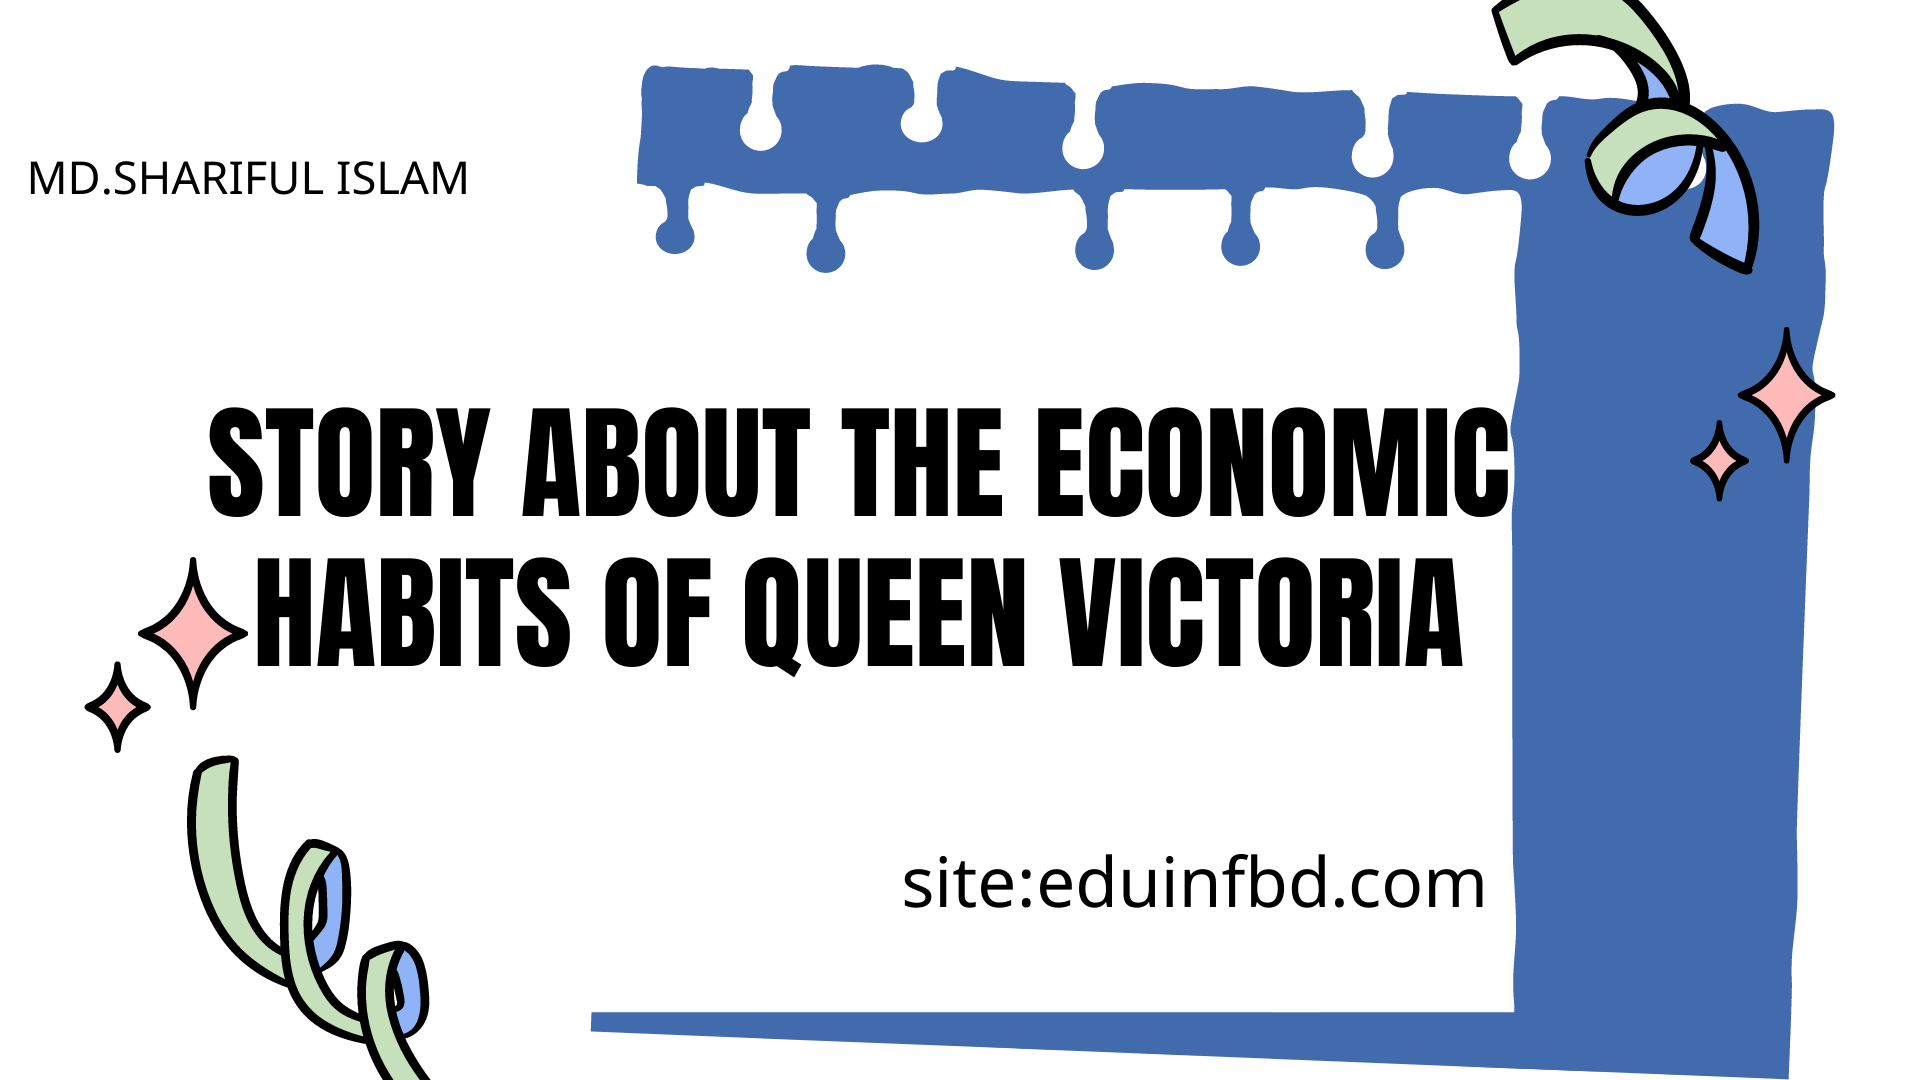 Story about the economic habits of queen Victoria